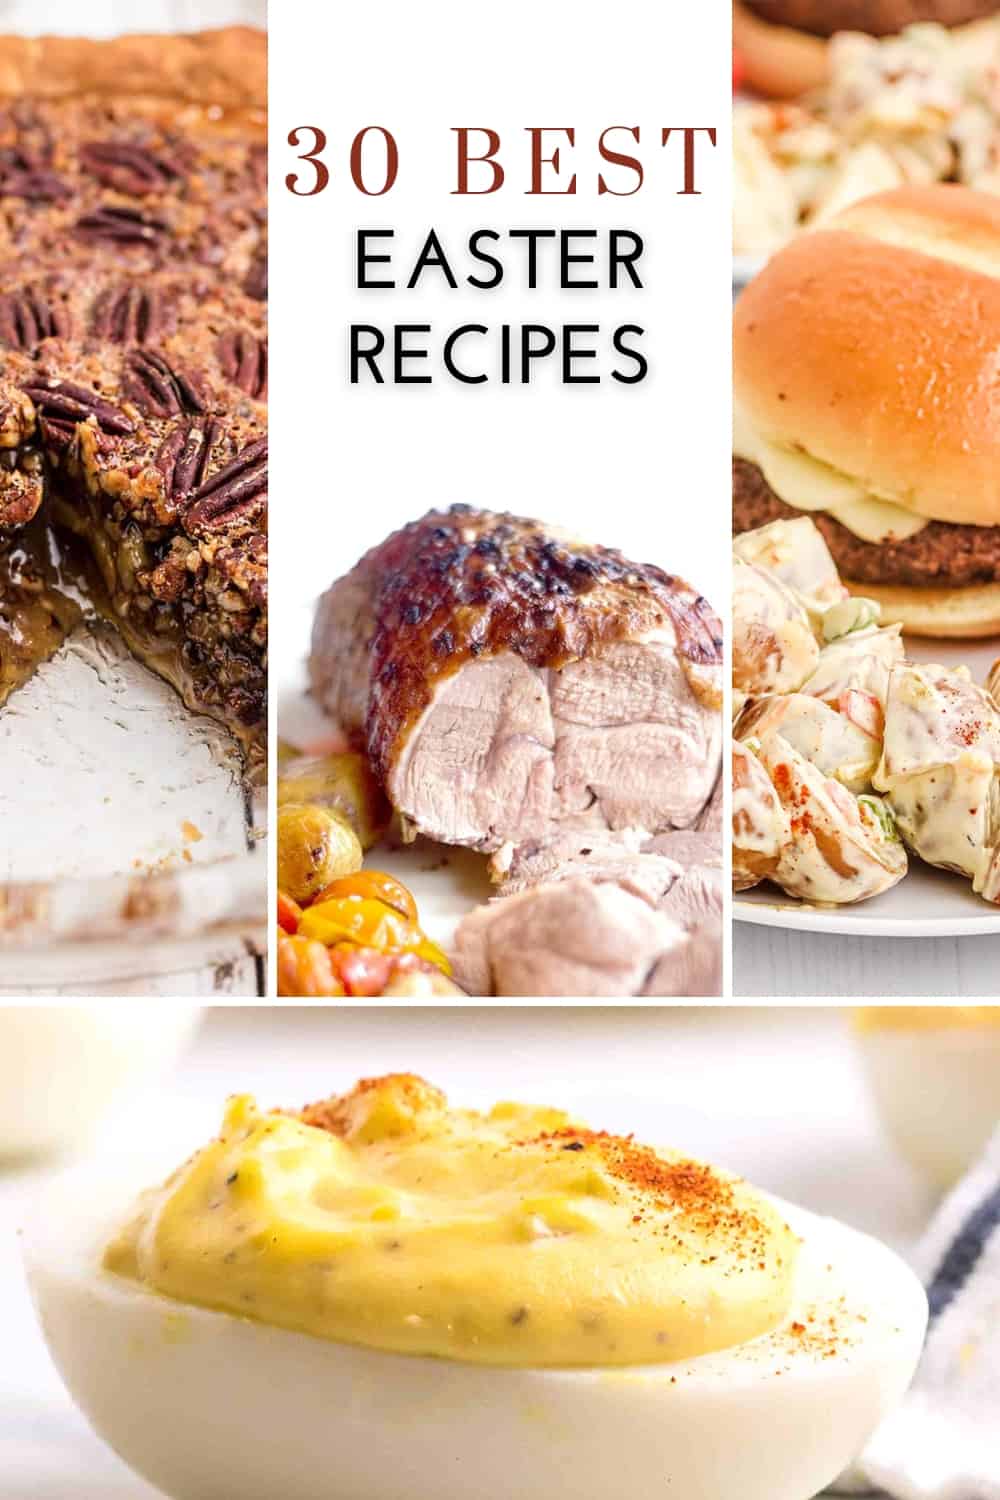 A collage of photos from recipes included in the post.